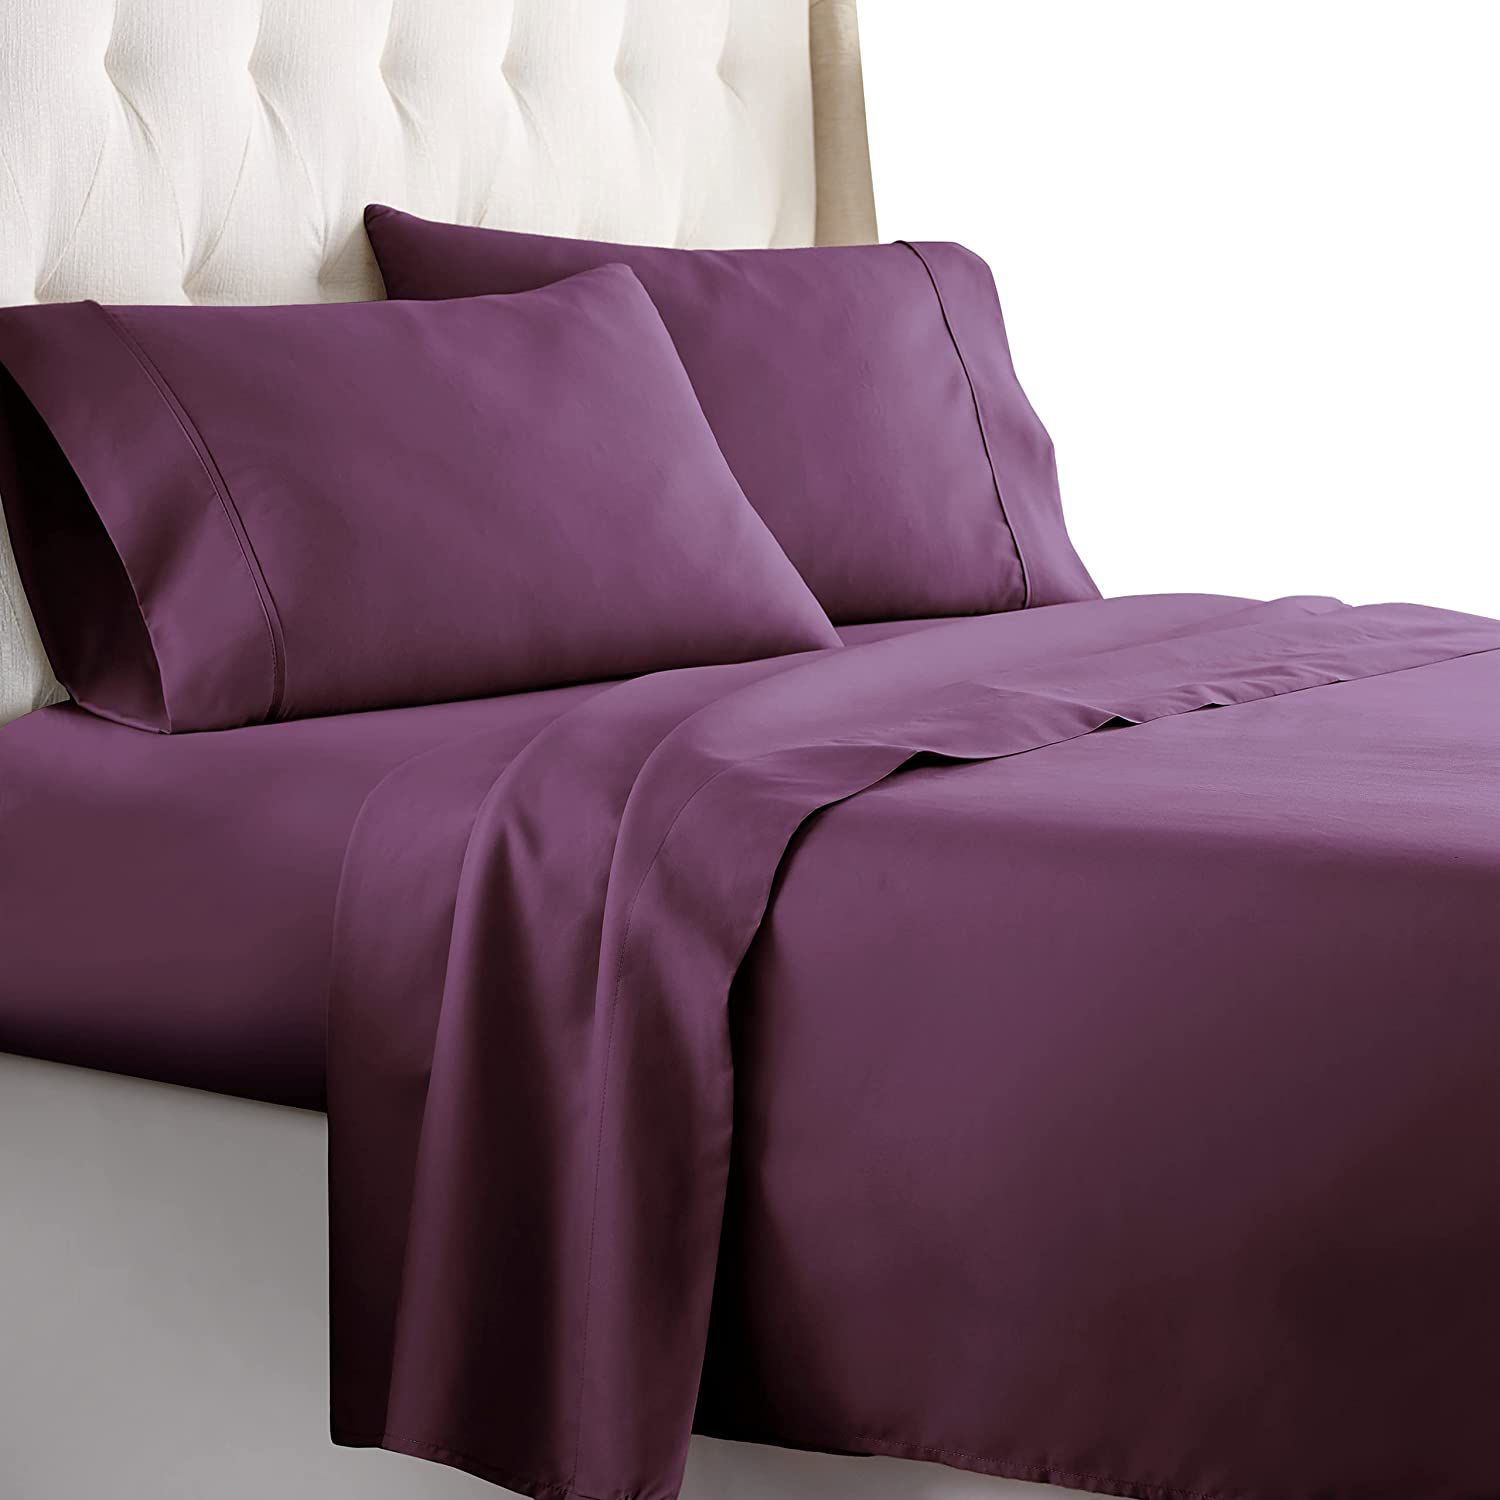 Details about   Trend Bedding Mart 1PC Solid Flat Sheet Smooth Touch Hotel Quality 100% Egyptian 